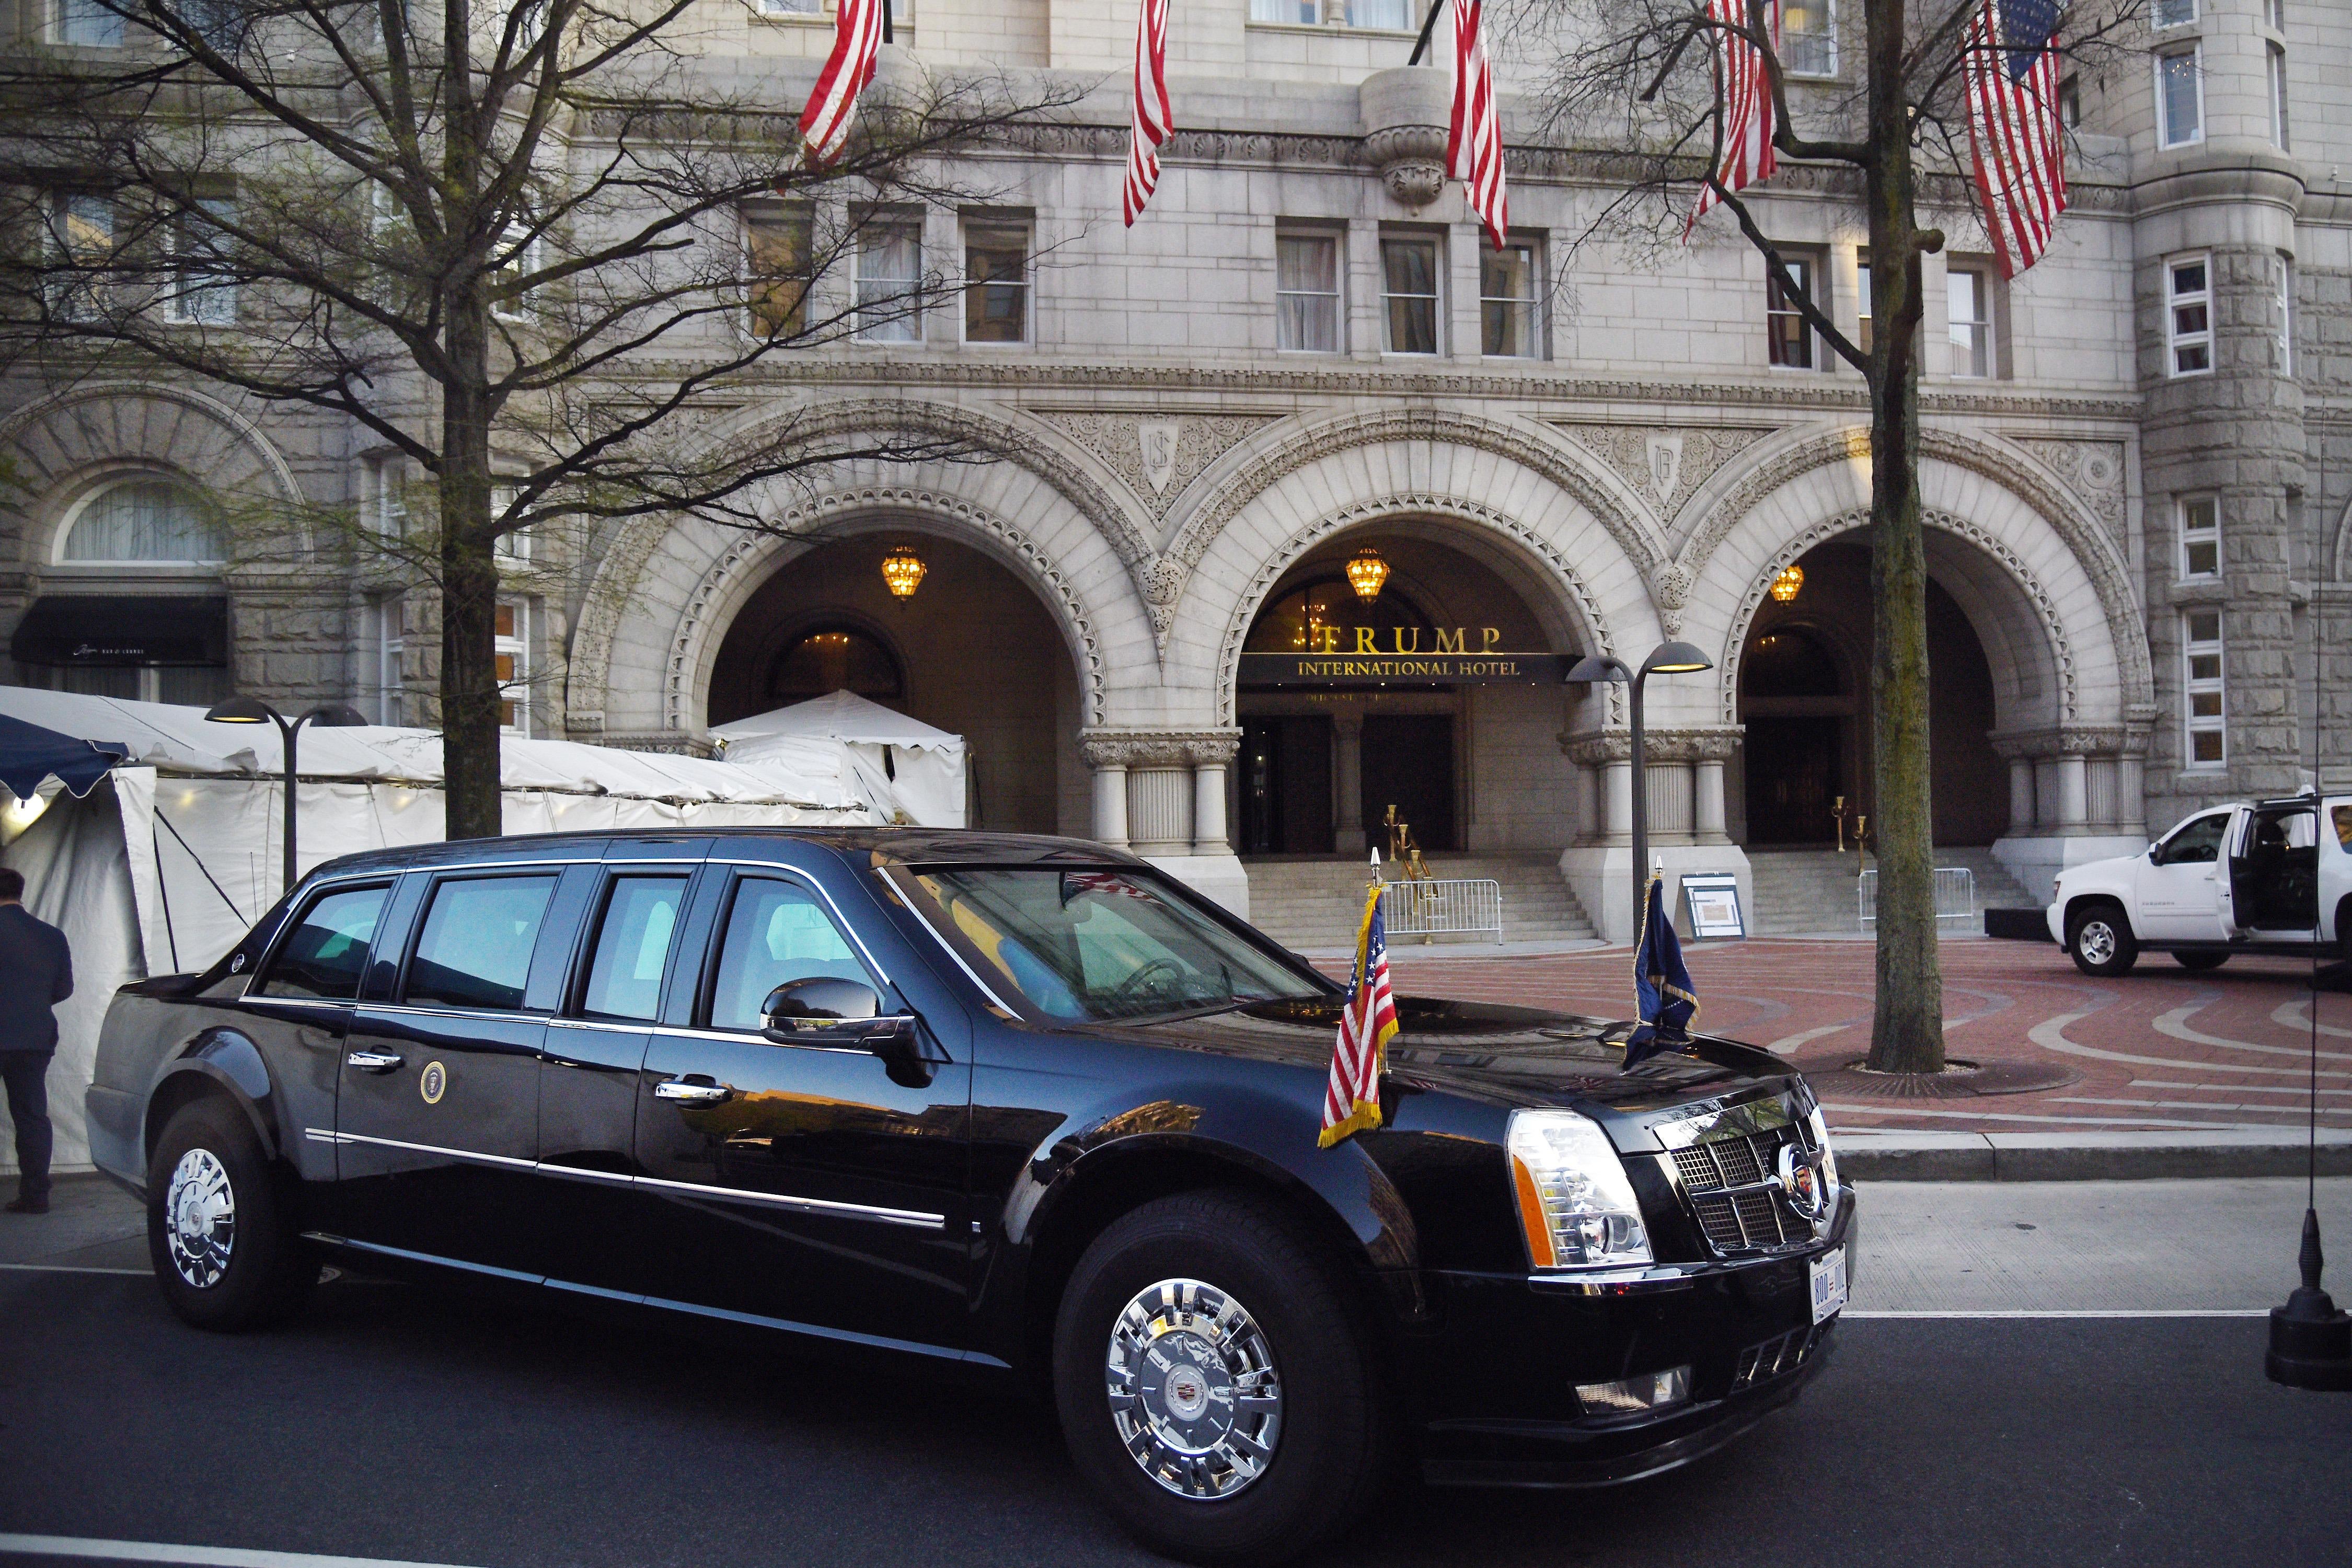 The presidential limousine parked in front of the Trump hotel as  President Trump attends dinner with supporters on April 30, 2018 in Washington, DC. 